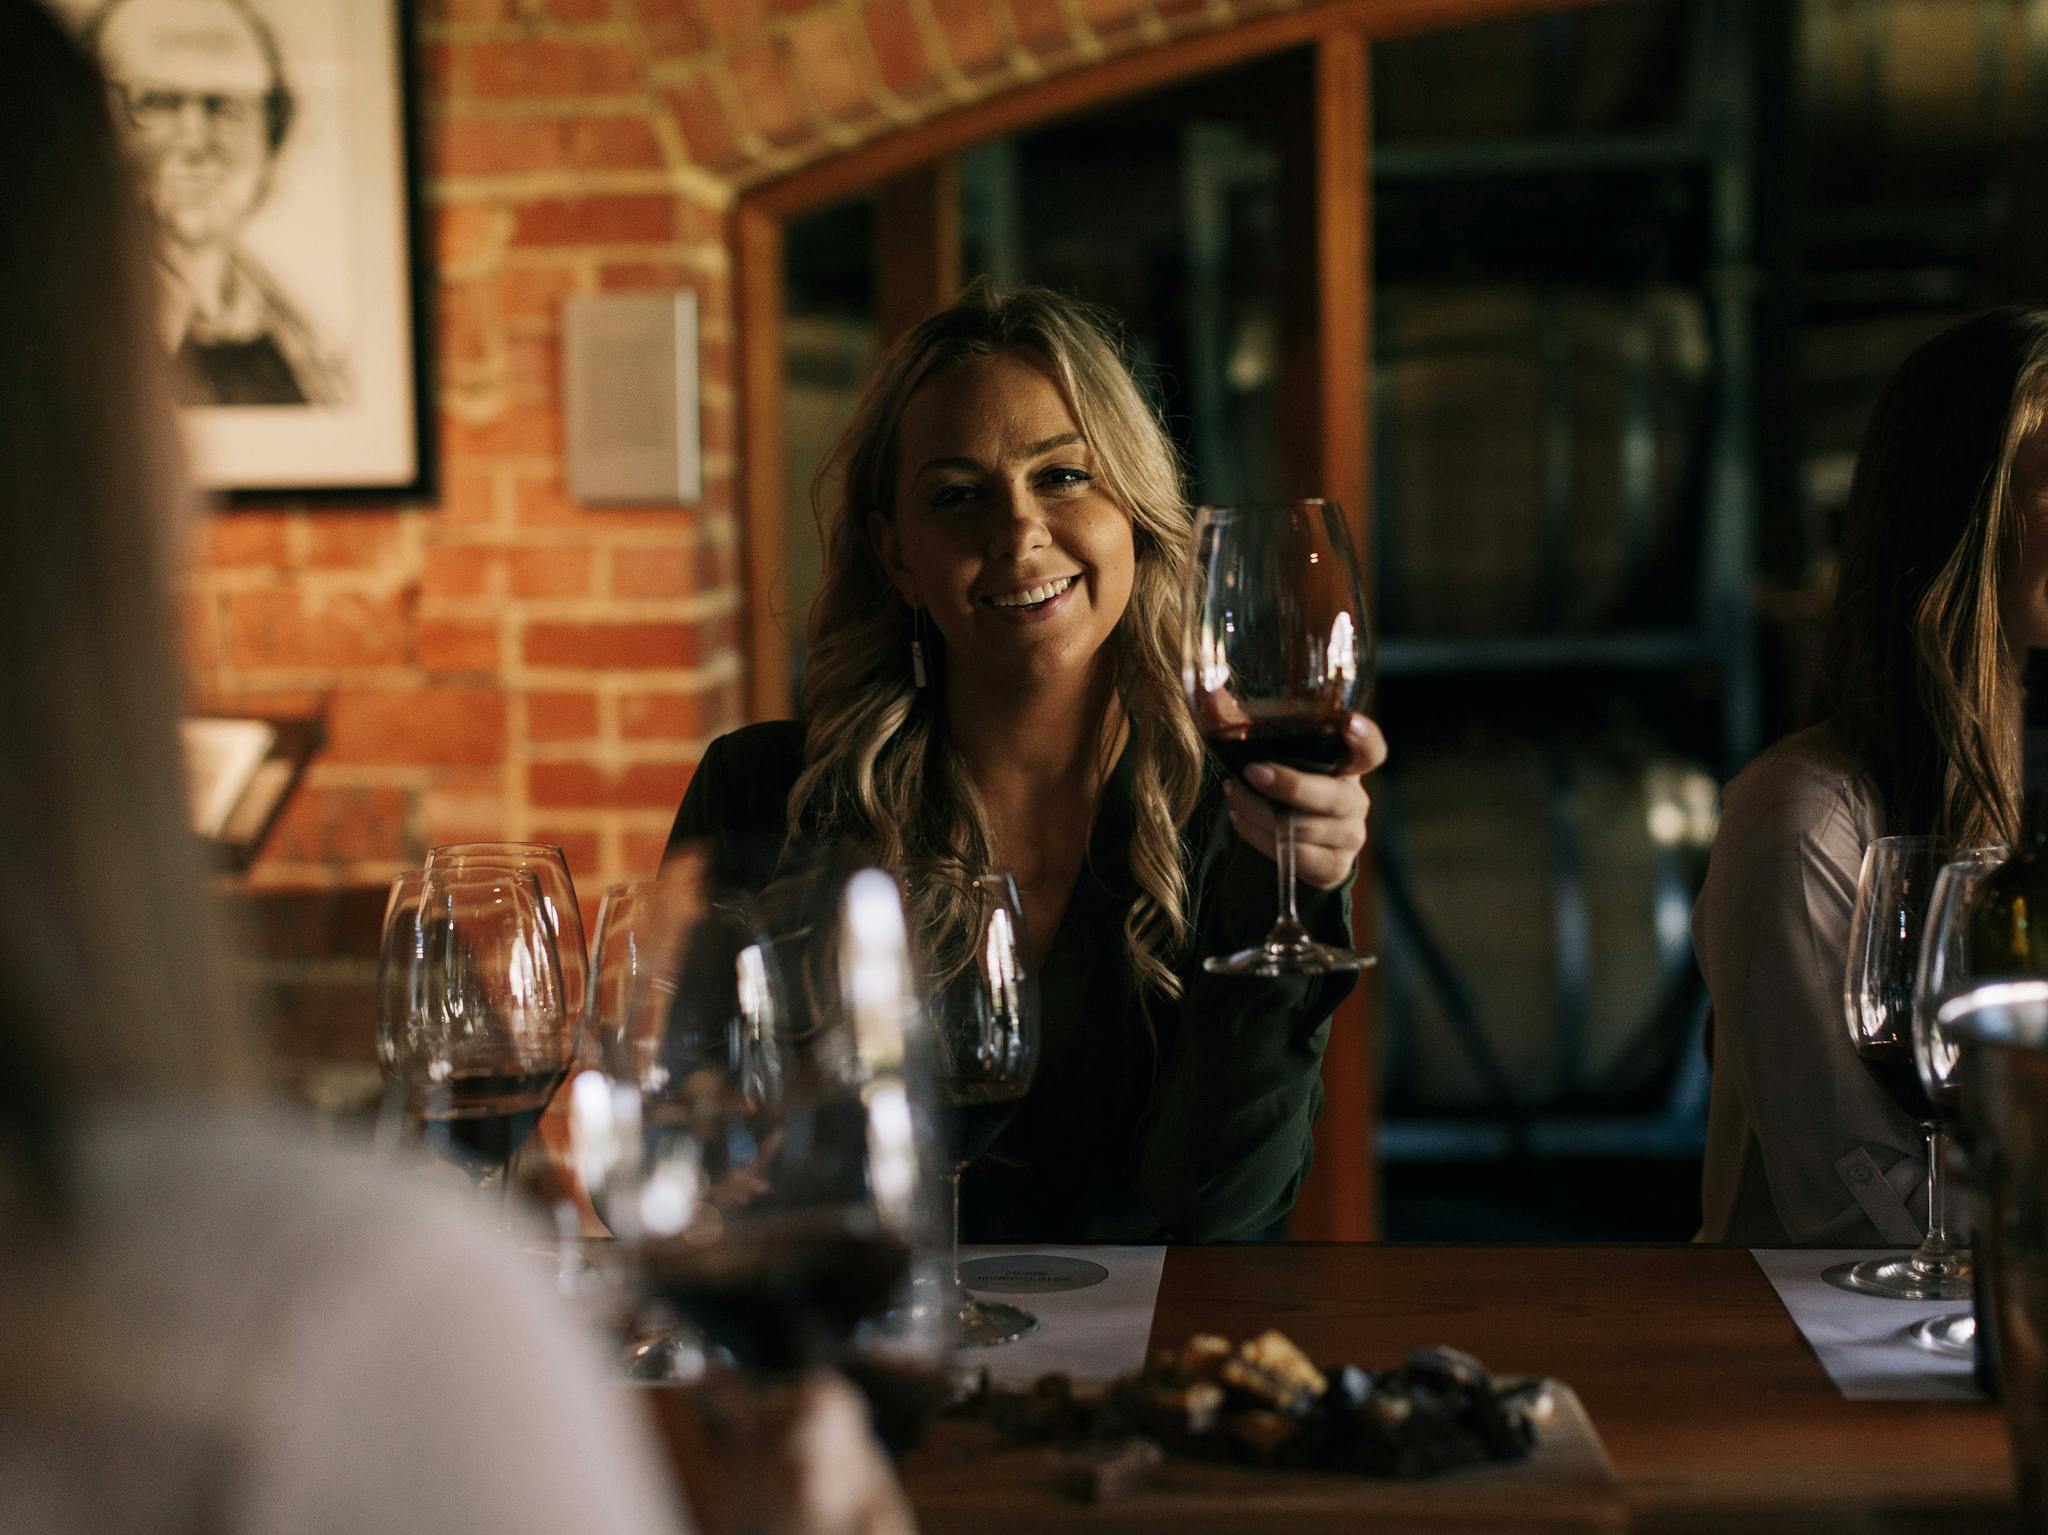 A guest raises her glass of red wine  in Trott's Cellar